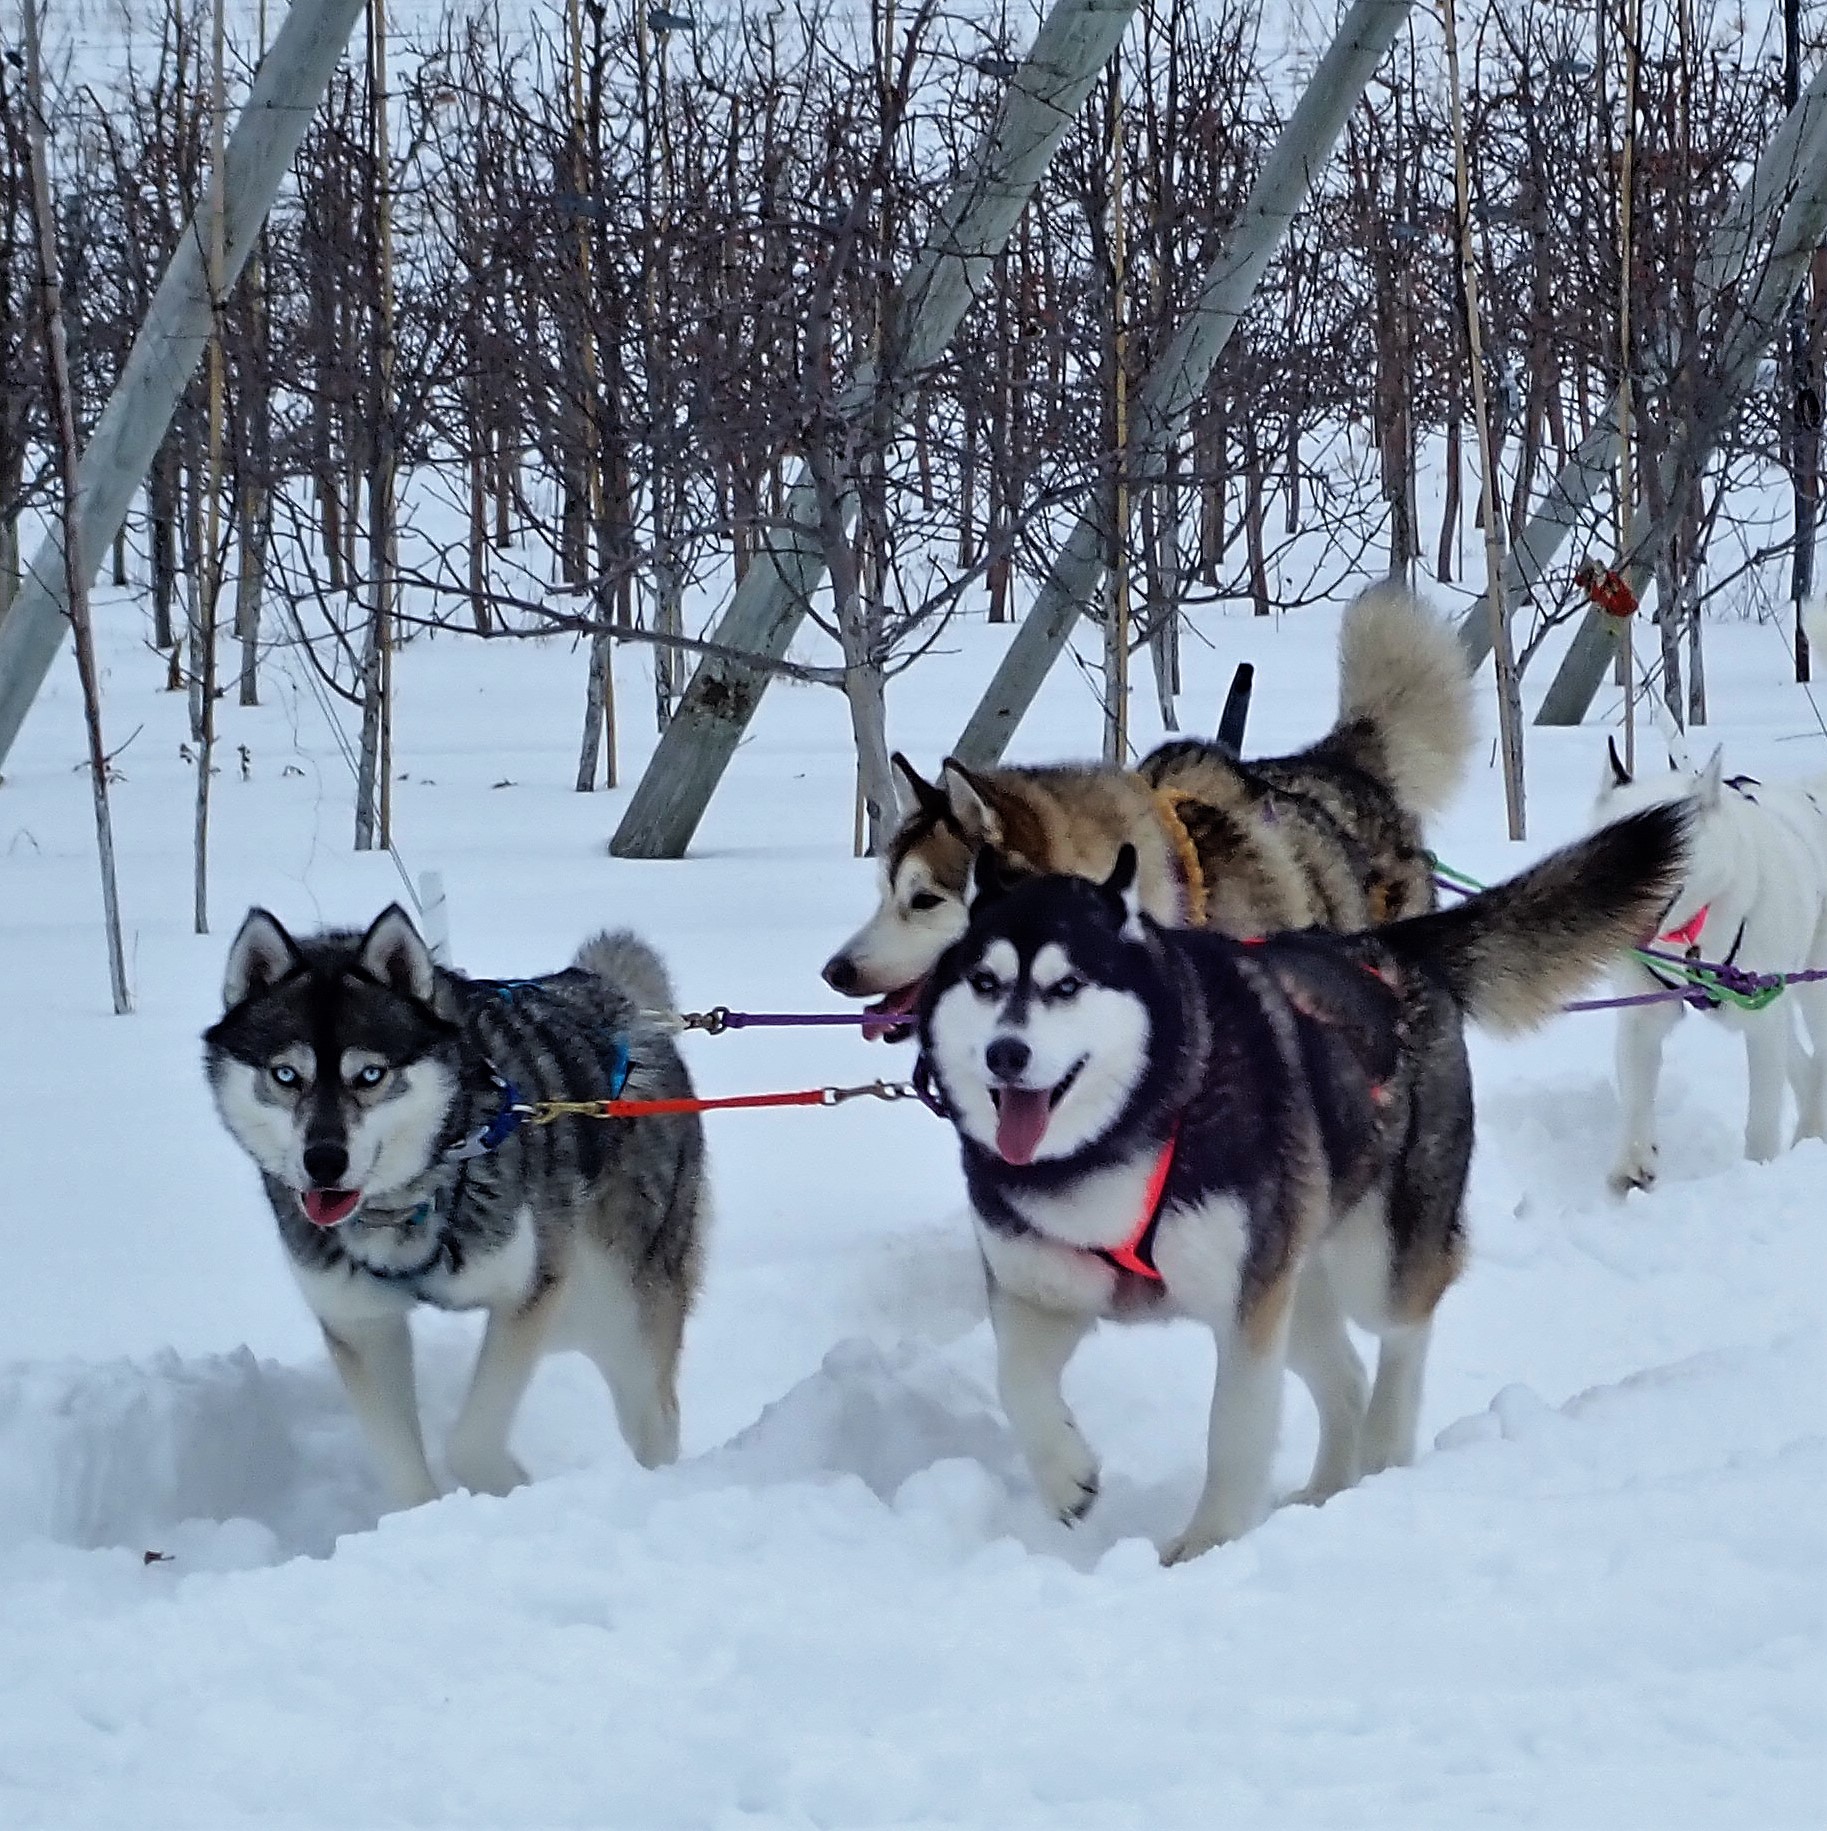 Things to do in winter: go on a dog sled ride with Second Chance Mushers